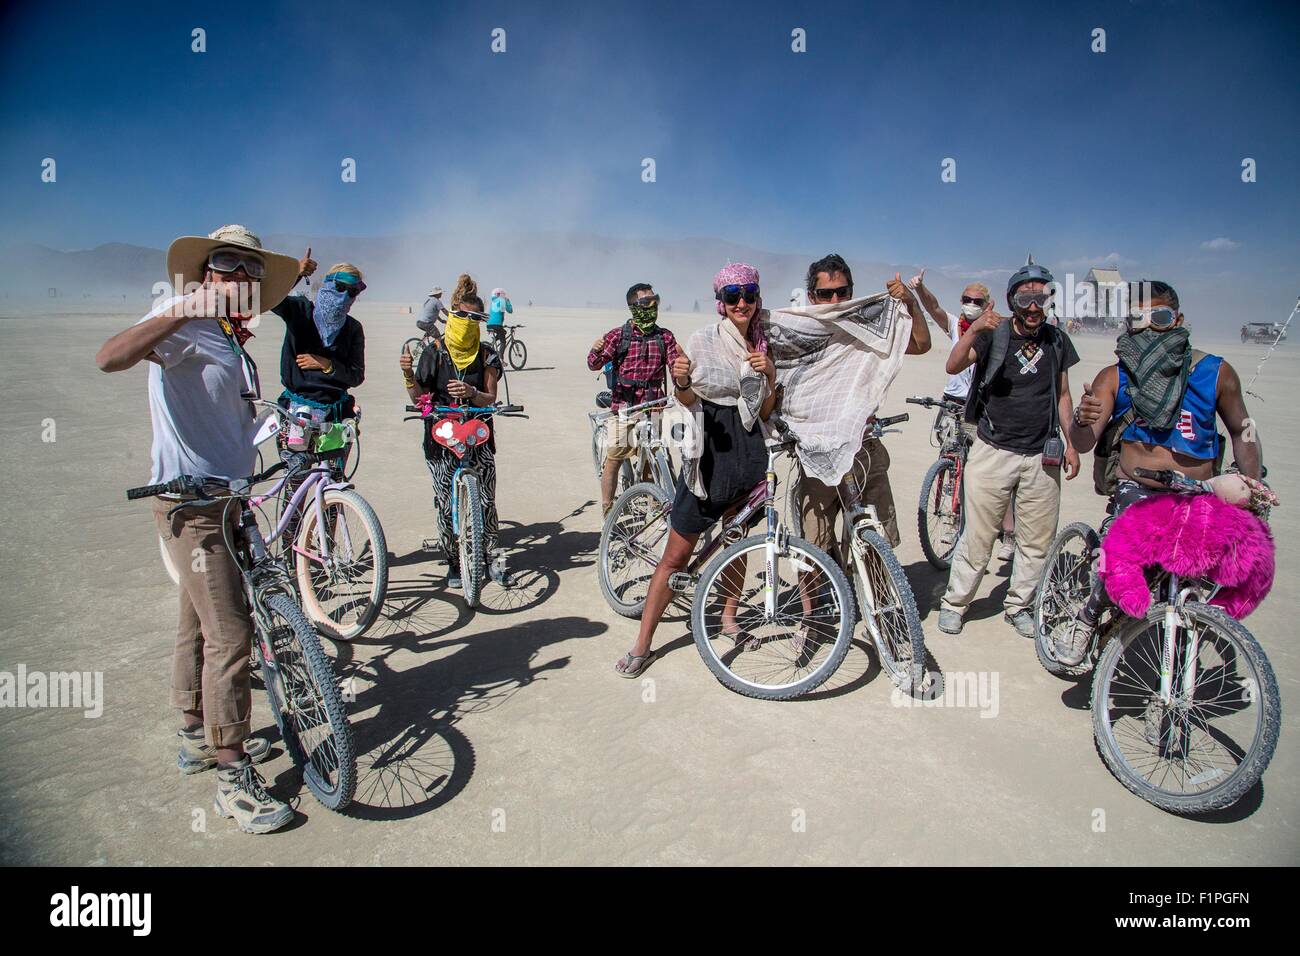 Burners on their bikes following a sand storm in the desert during the annual Burning Man festival September 5, 2015 in Black Rock City, Nevada. Burning Man's official art theme this year is 'Carnival of Mirrors' and is expected to be attended by 70,000 people for the week long event. Stock Photo